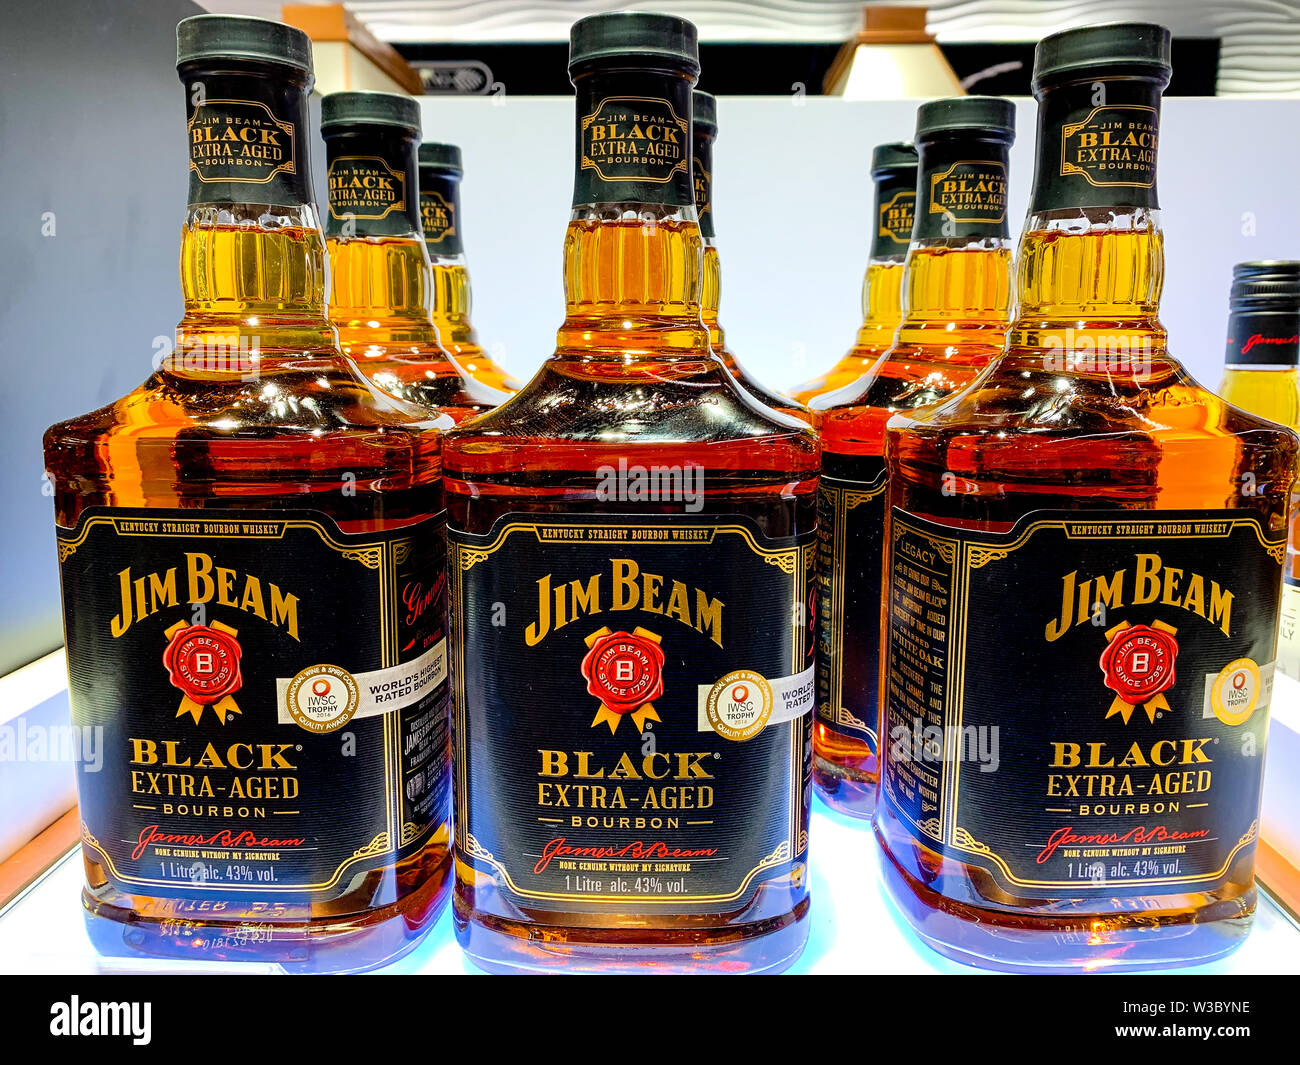 Bottles of Jim Beam, extra aged black bourbon with 43% alcohol on display. Jim Beam is a brand of bourbon whiskey produced in Clermont, Kentucky. Ista Stock Photo